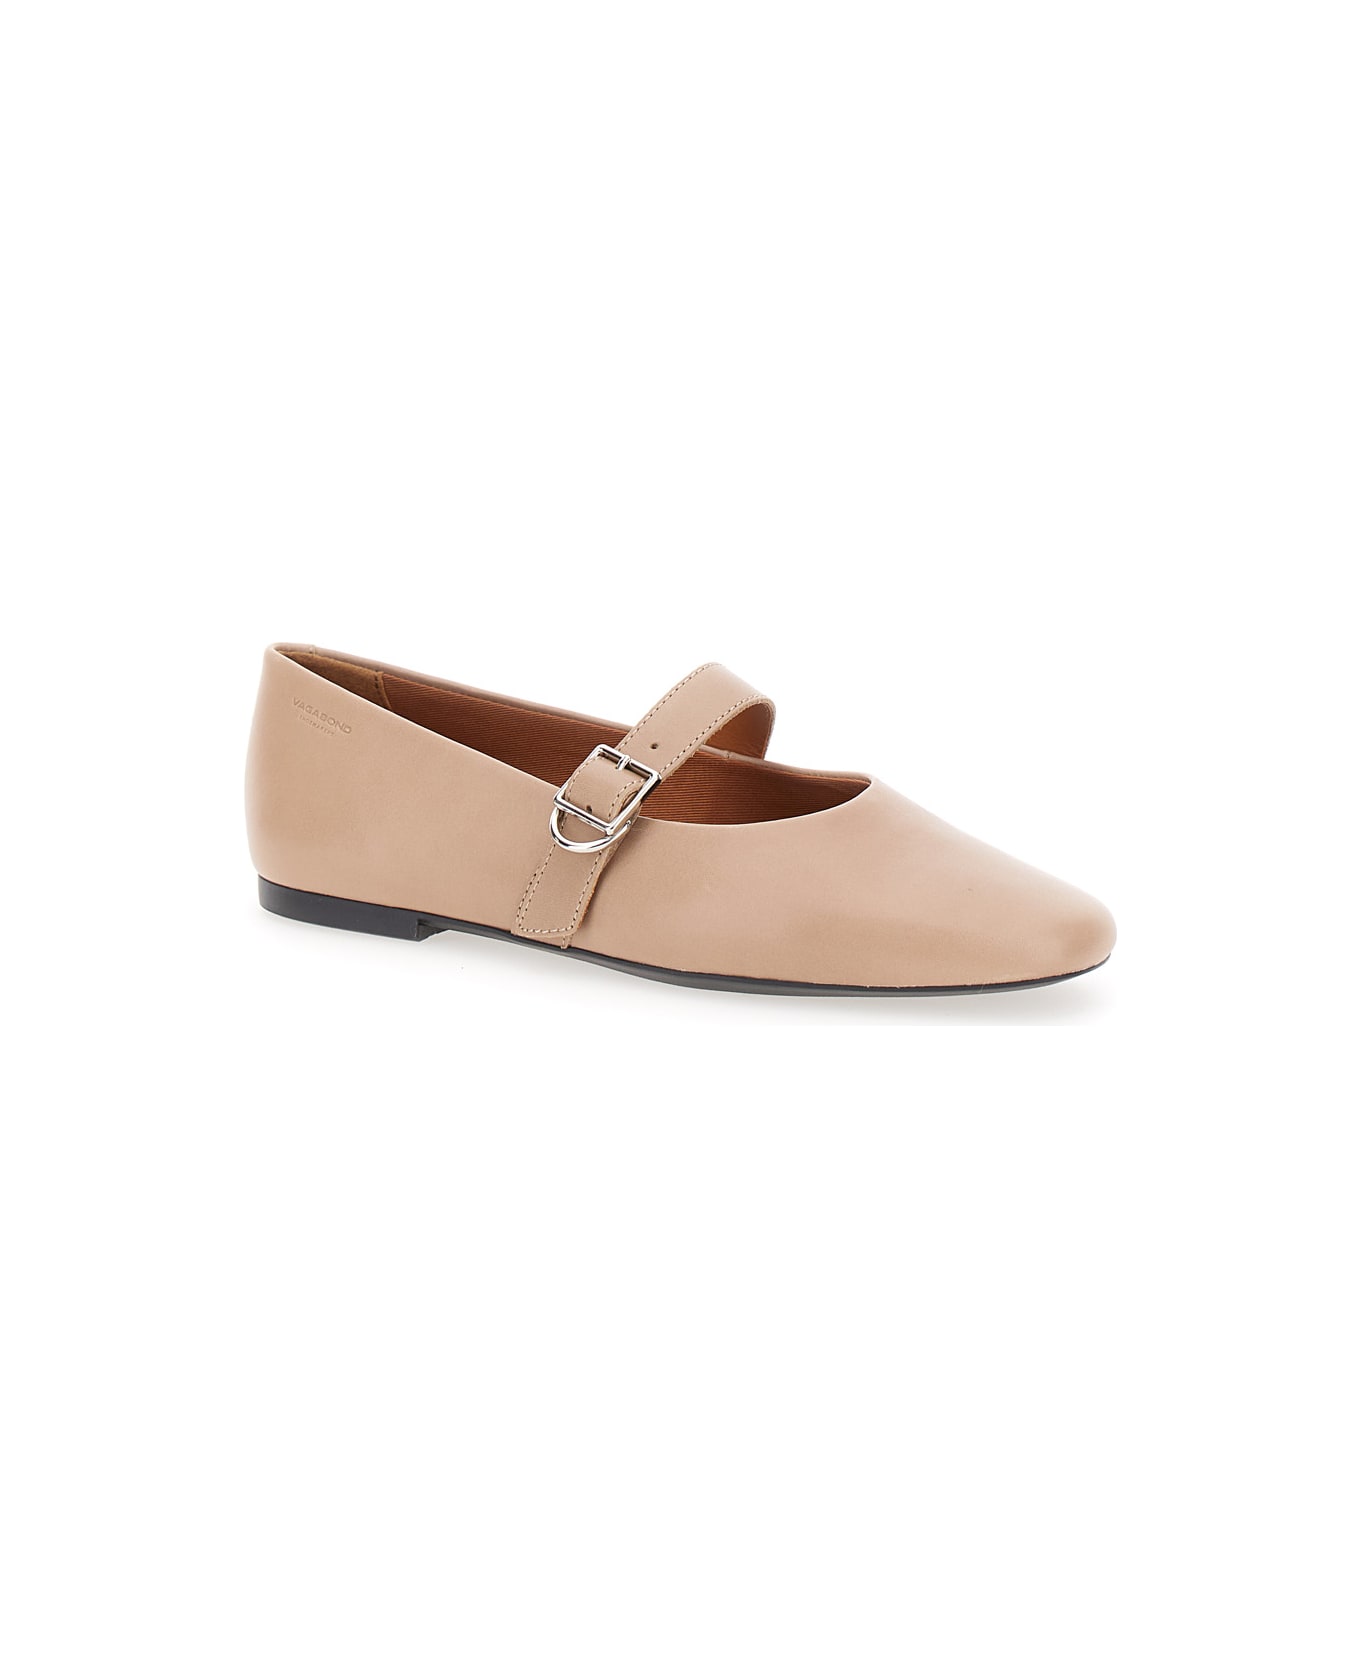 Vagabond 'jolin' Beige Ballet Flats With Strap In Smooth Leather Woman - Beige